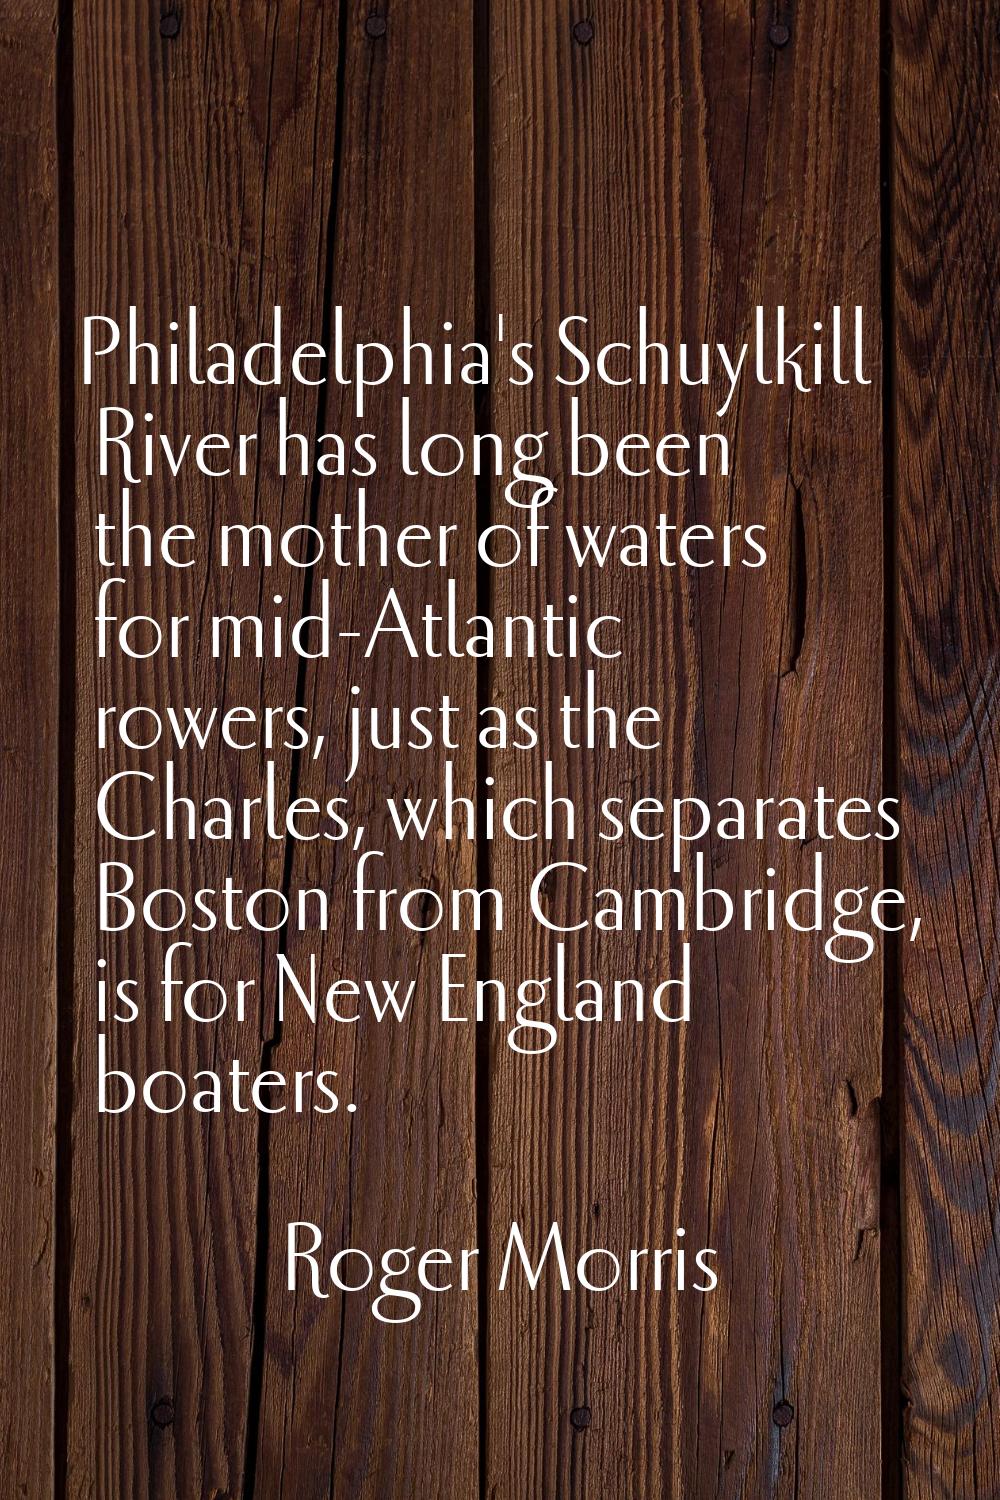 Philadelphia's Schuylkill River has long been the mother of waters for mid-Atlantic rowers, just as